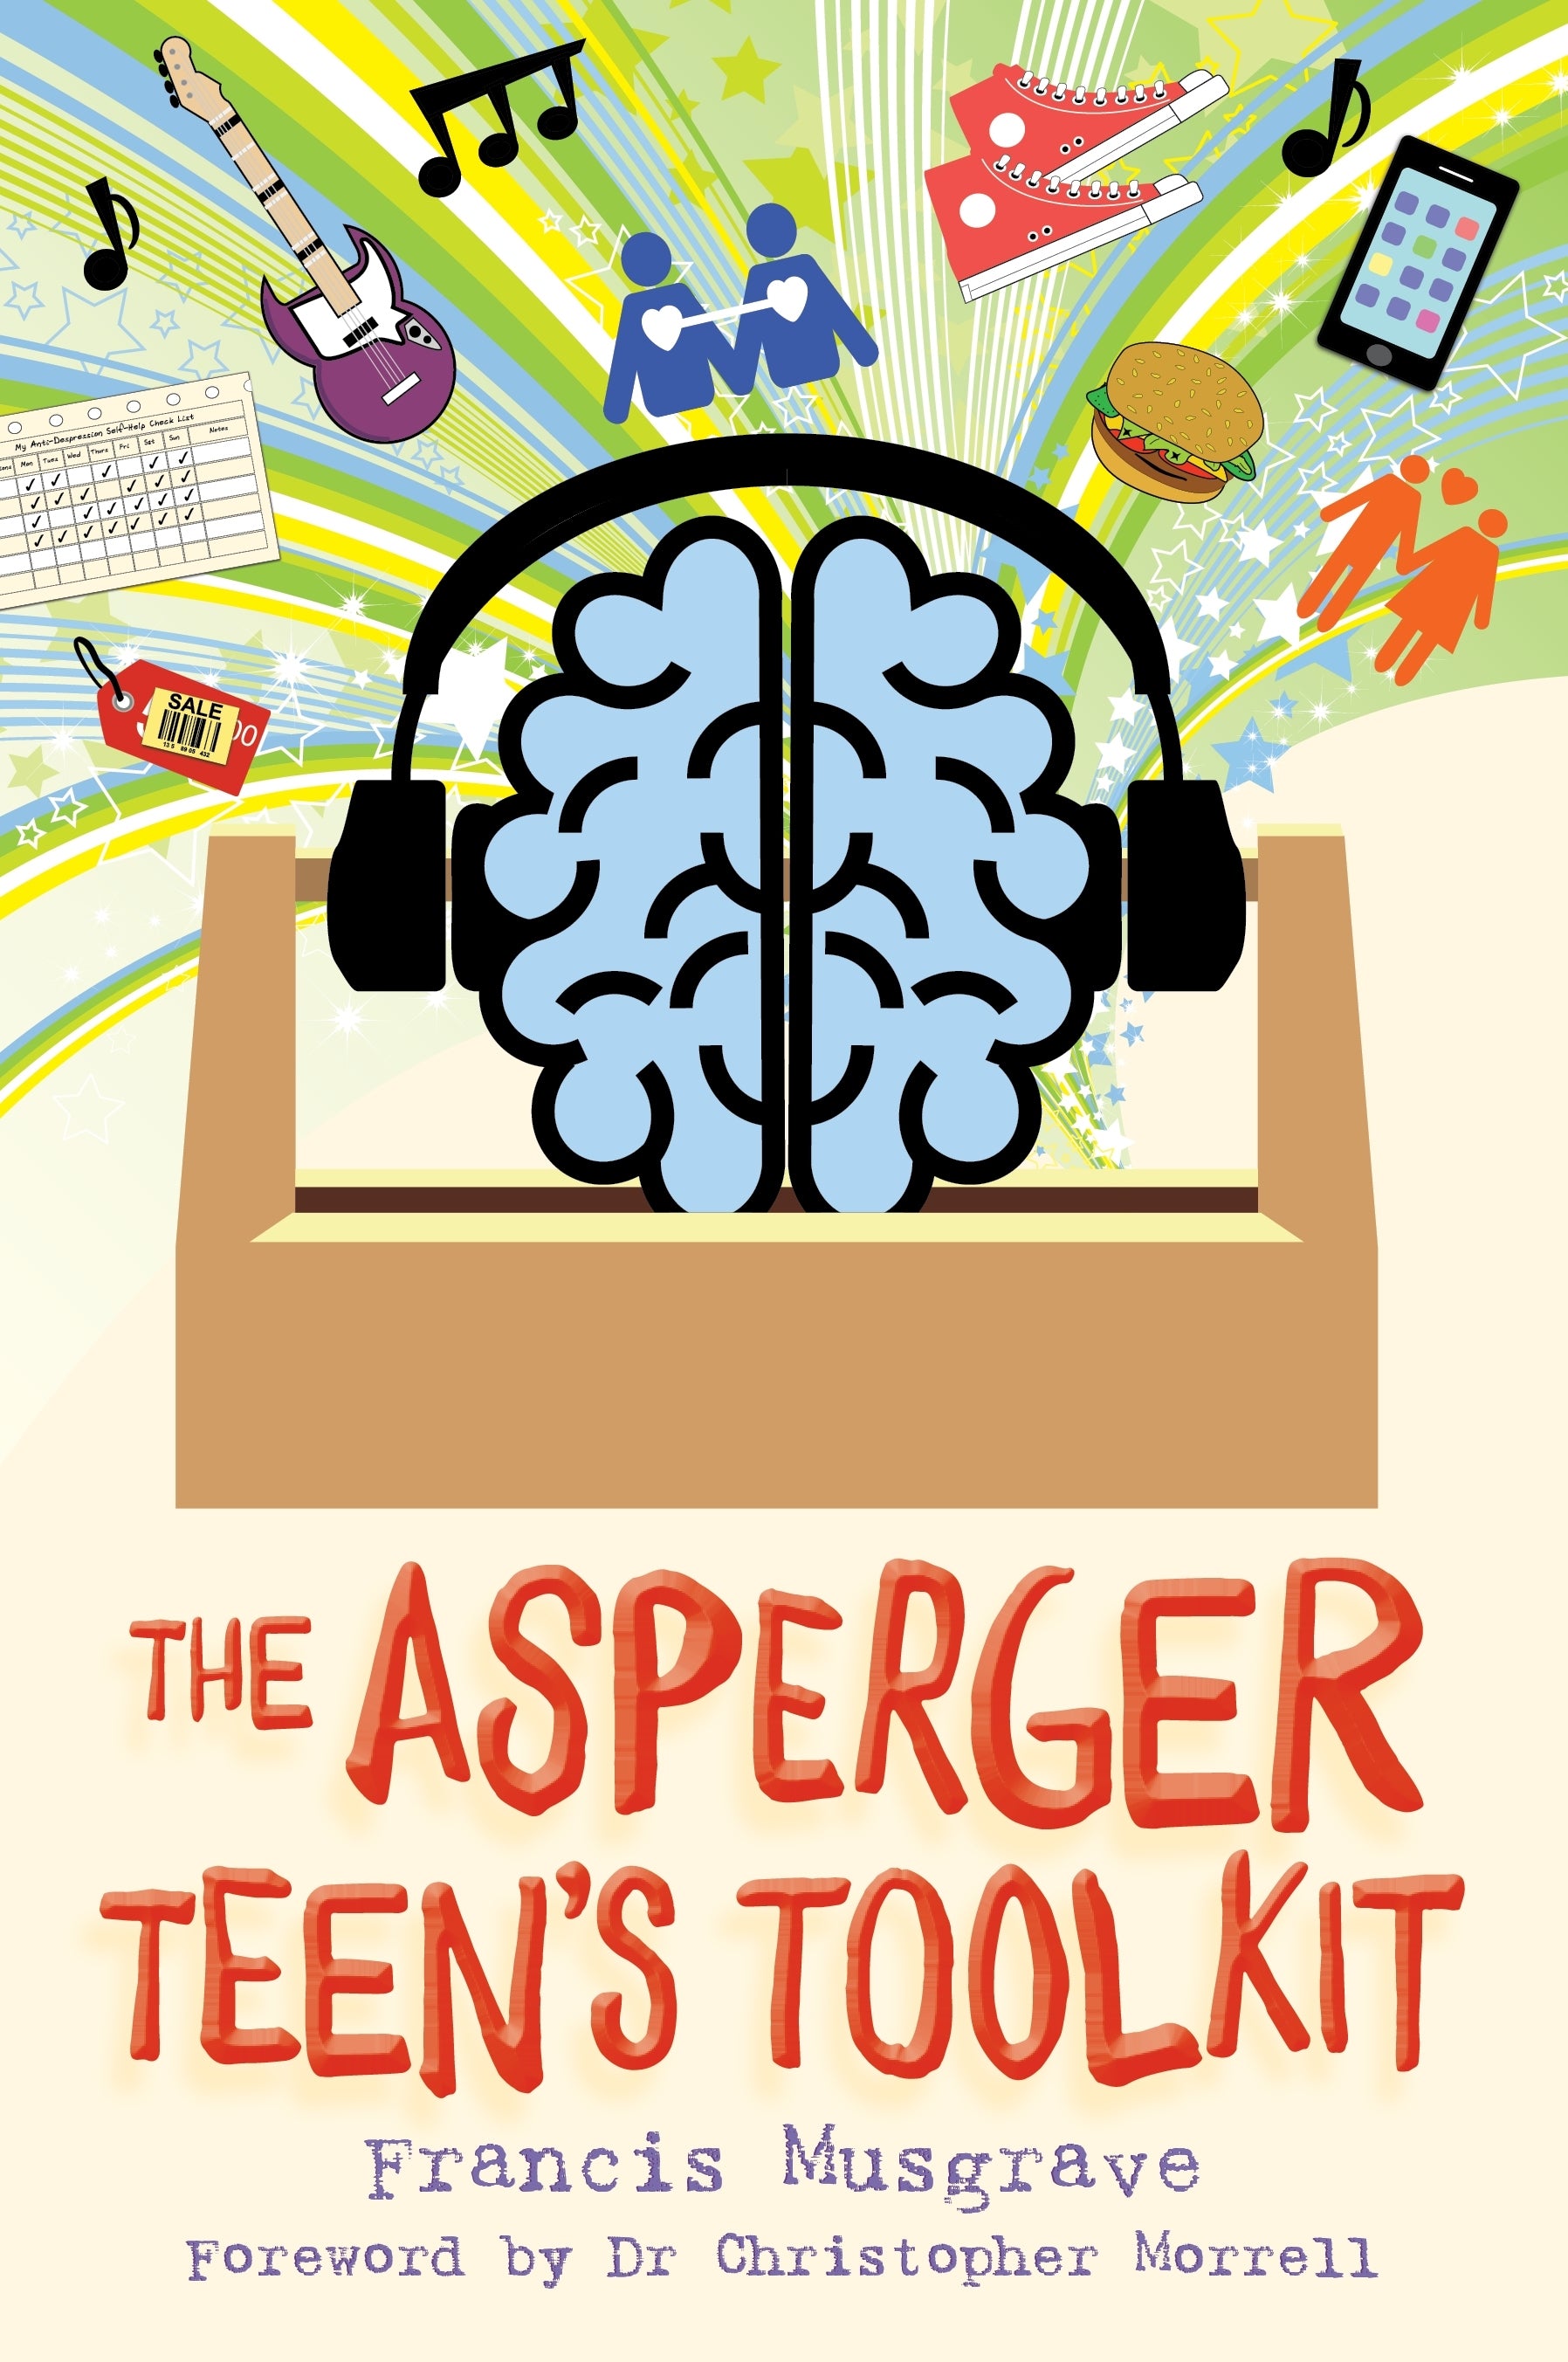 The Asperger Teen's Toolkit by Dr Christopher Morrell, Francis Musgrave